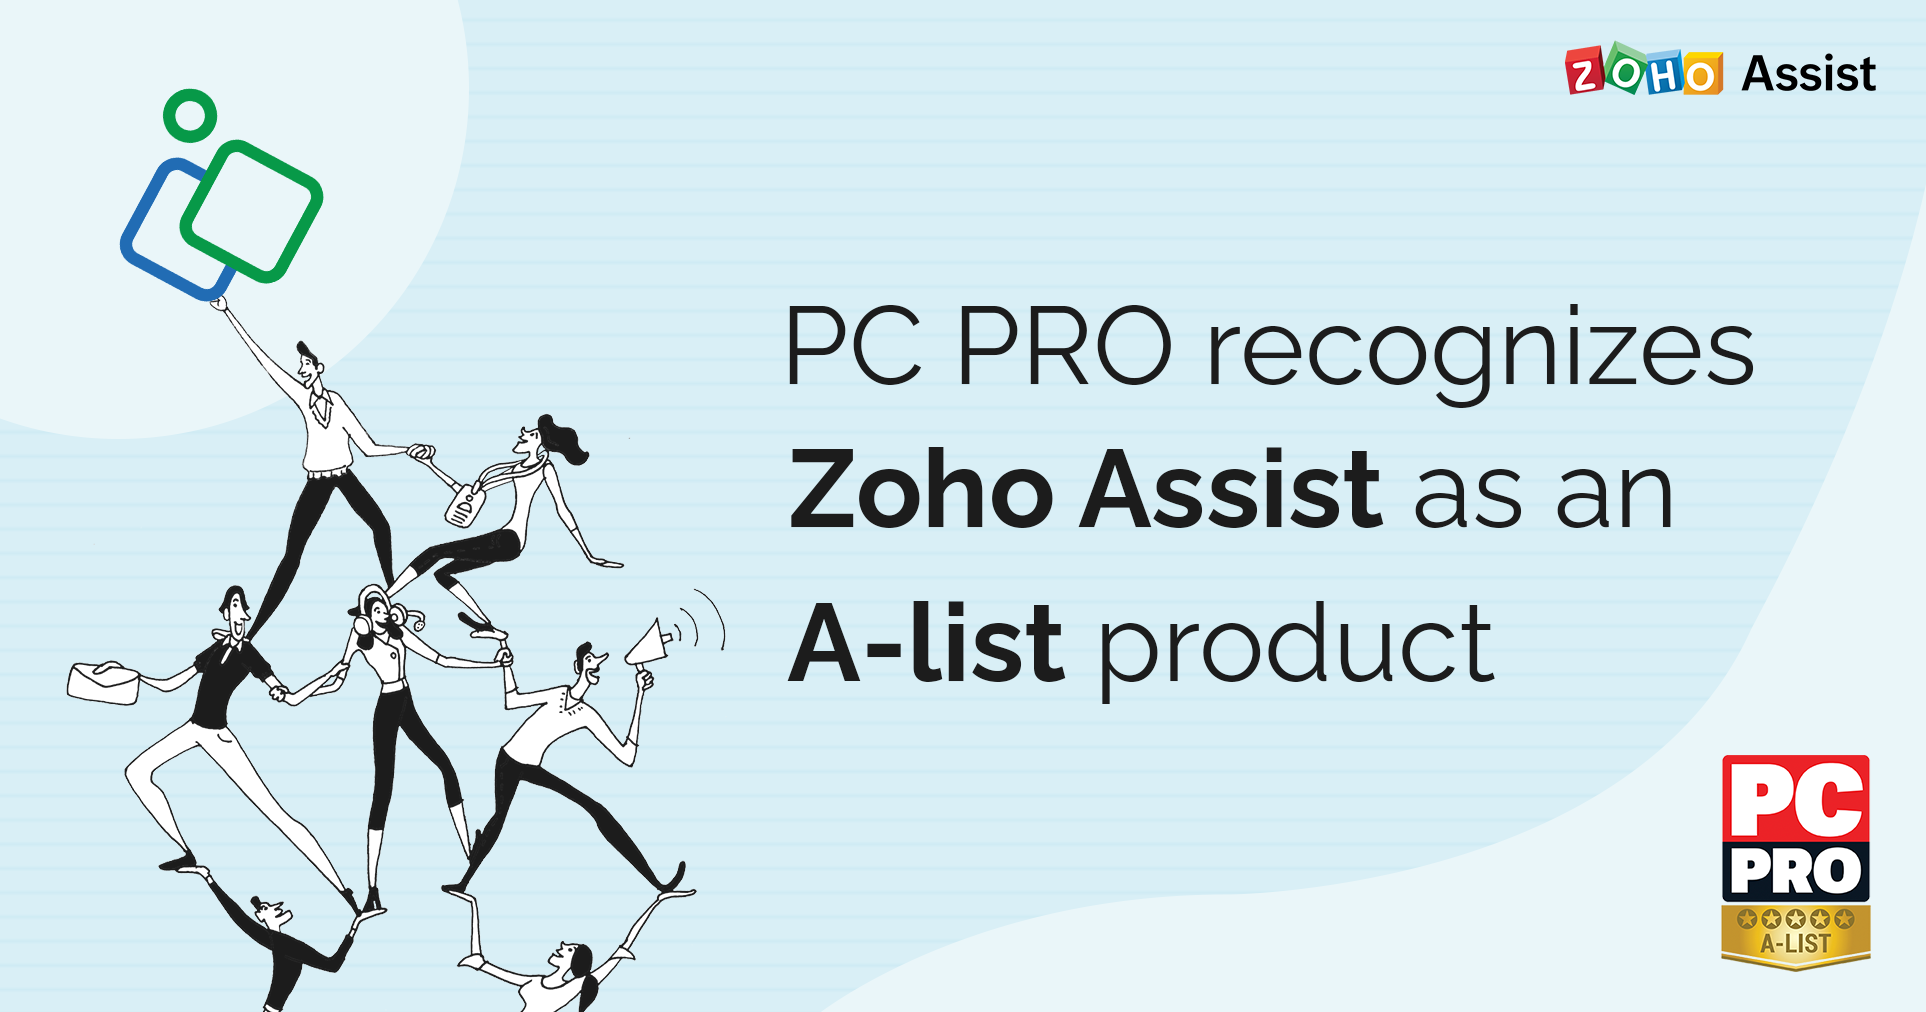 Zoho Assist has been recognized as an A-list product by PC Pro